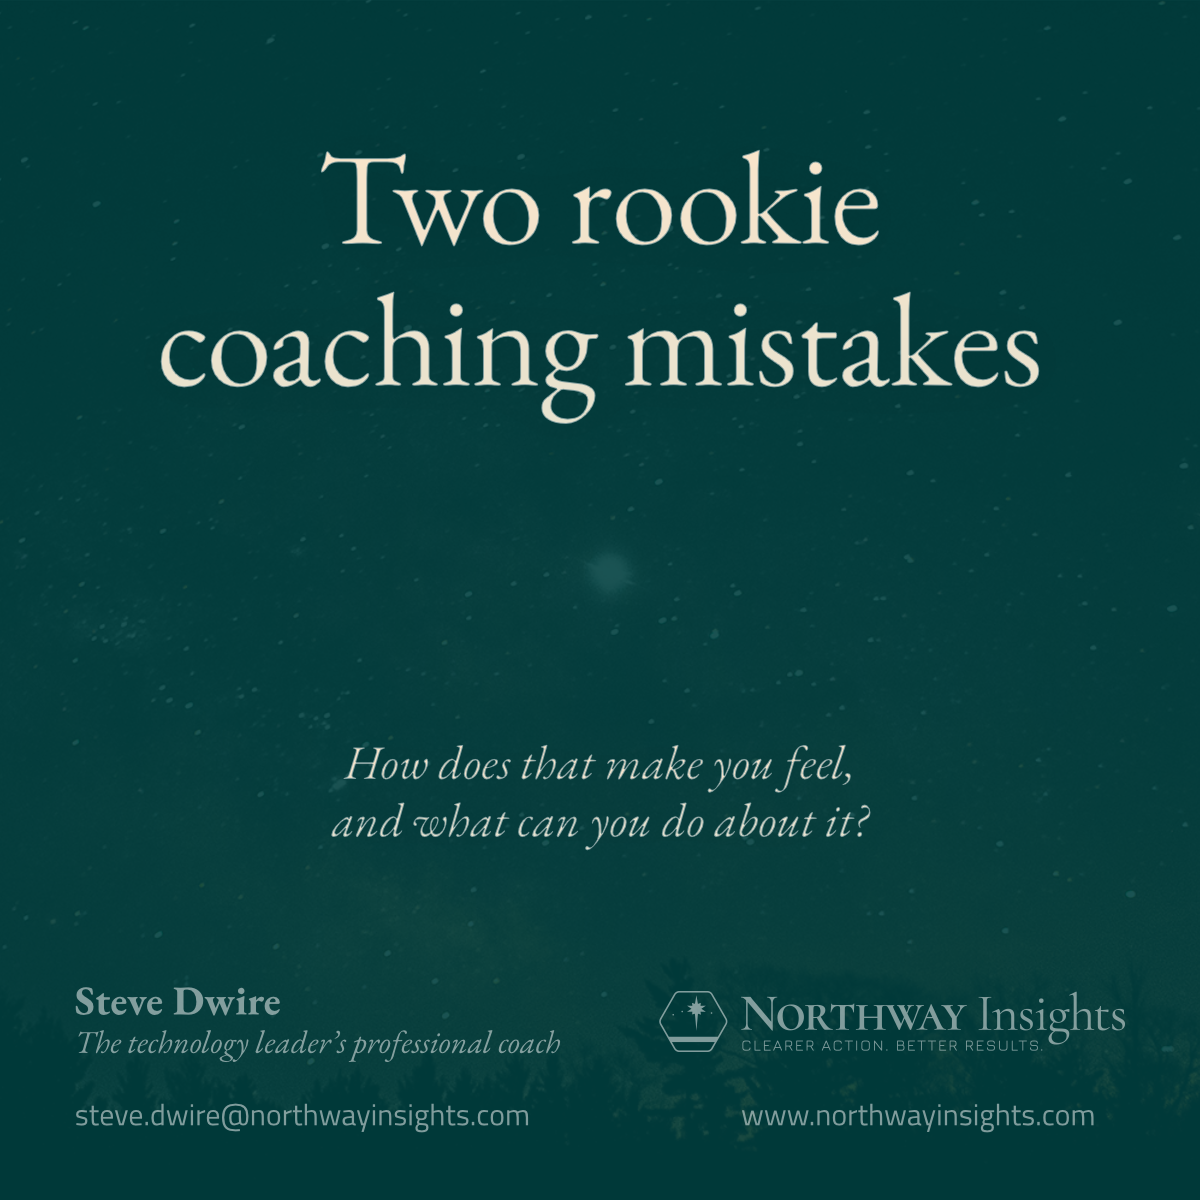 Two rookie coaching mistakes (How does that make you feel, and what can you do about it?)